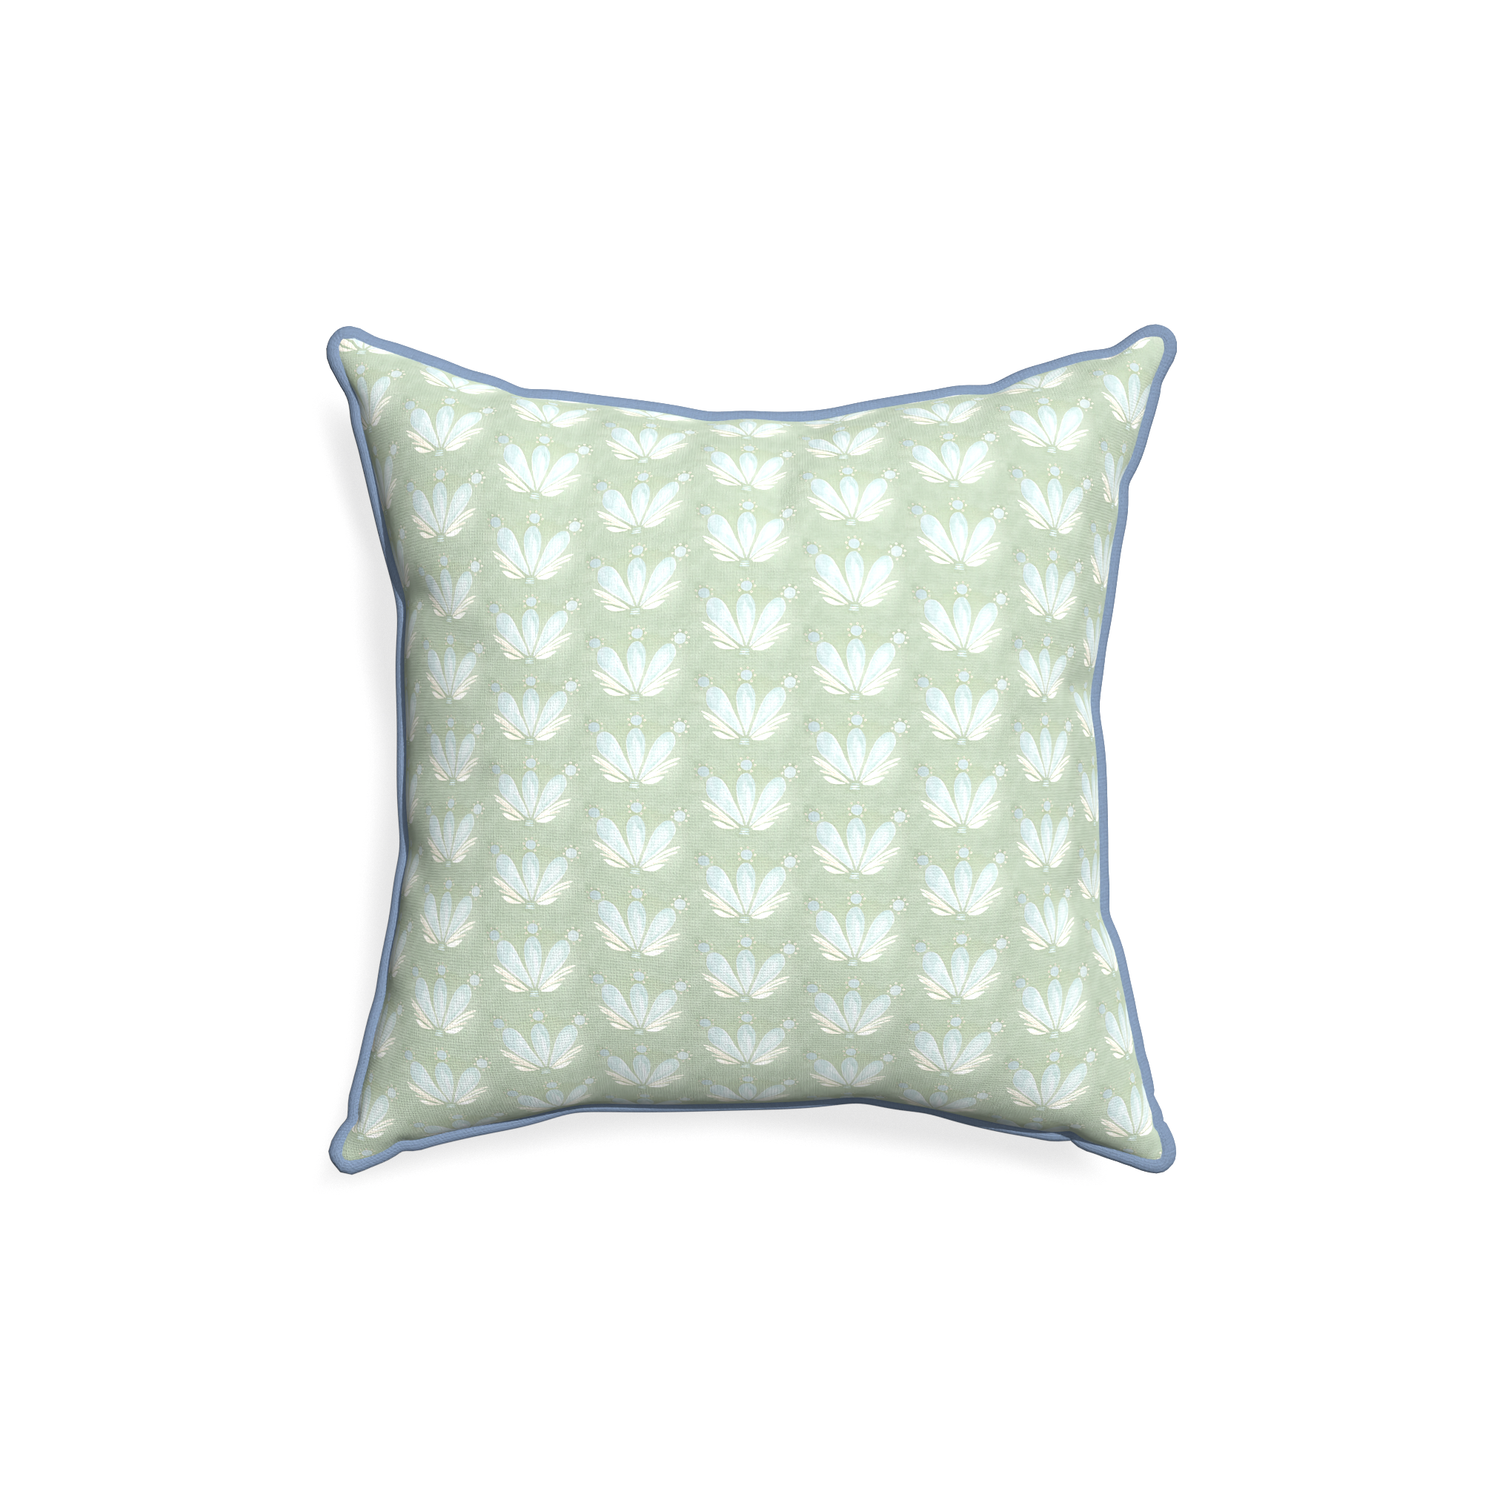 18-square serena sea salt custom pillow with sky piping on white background